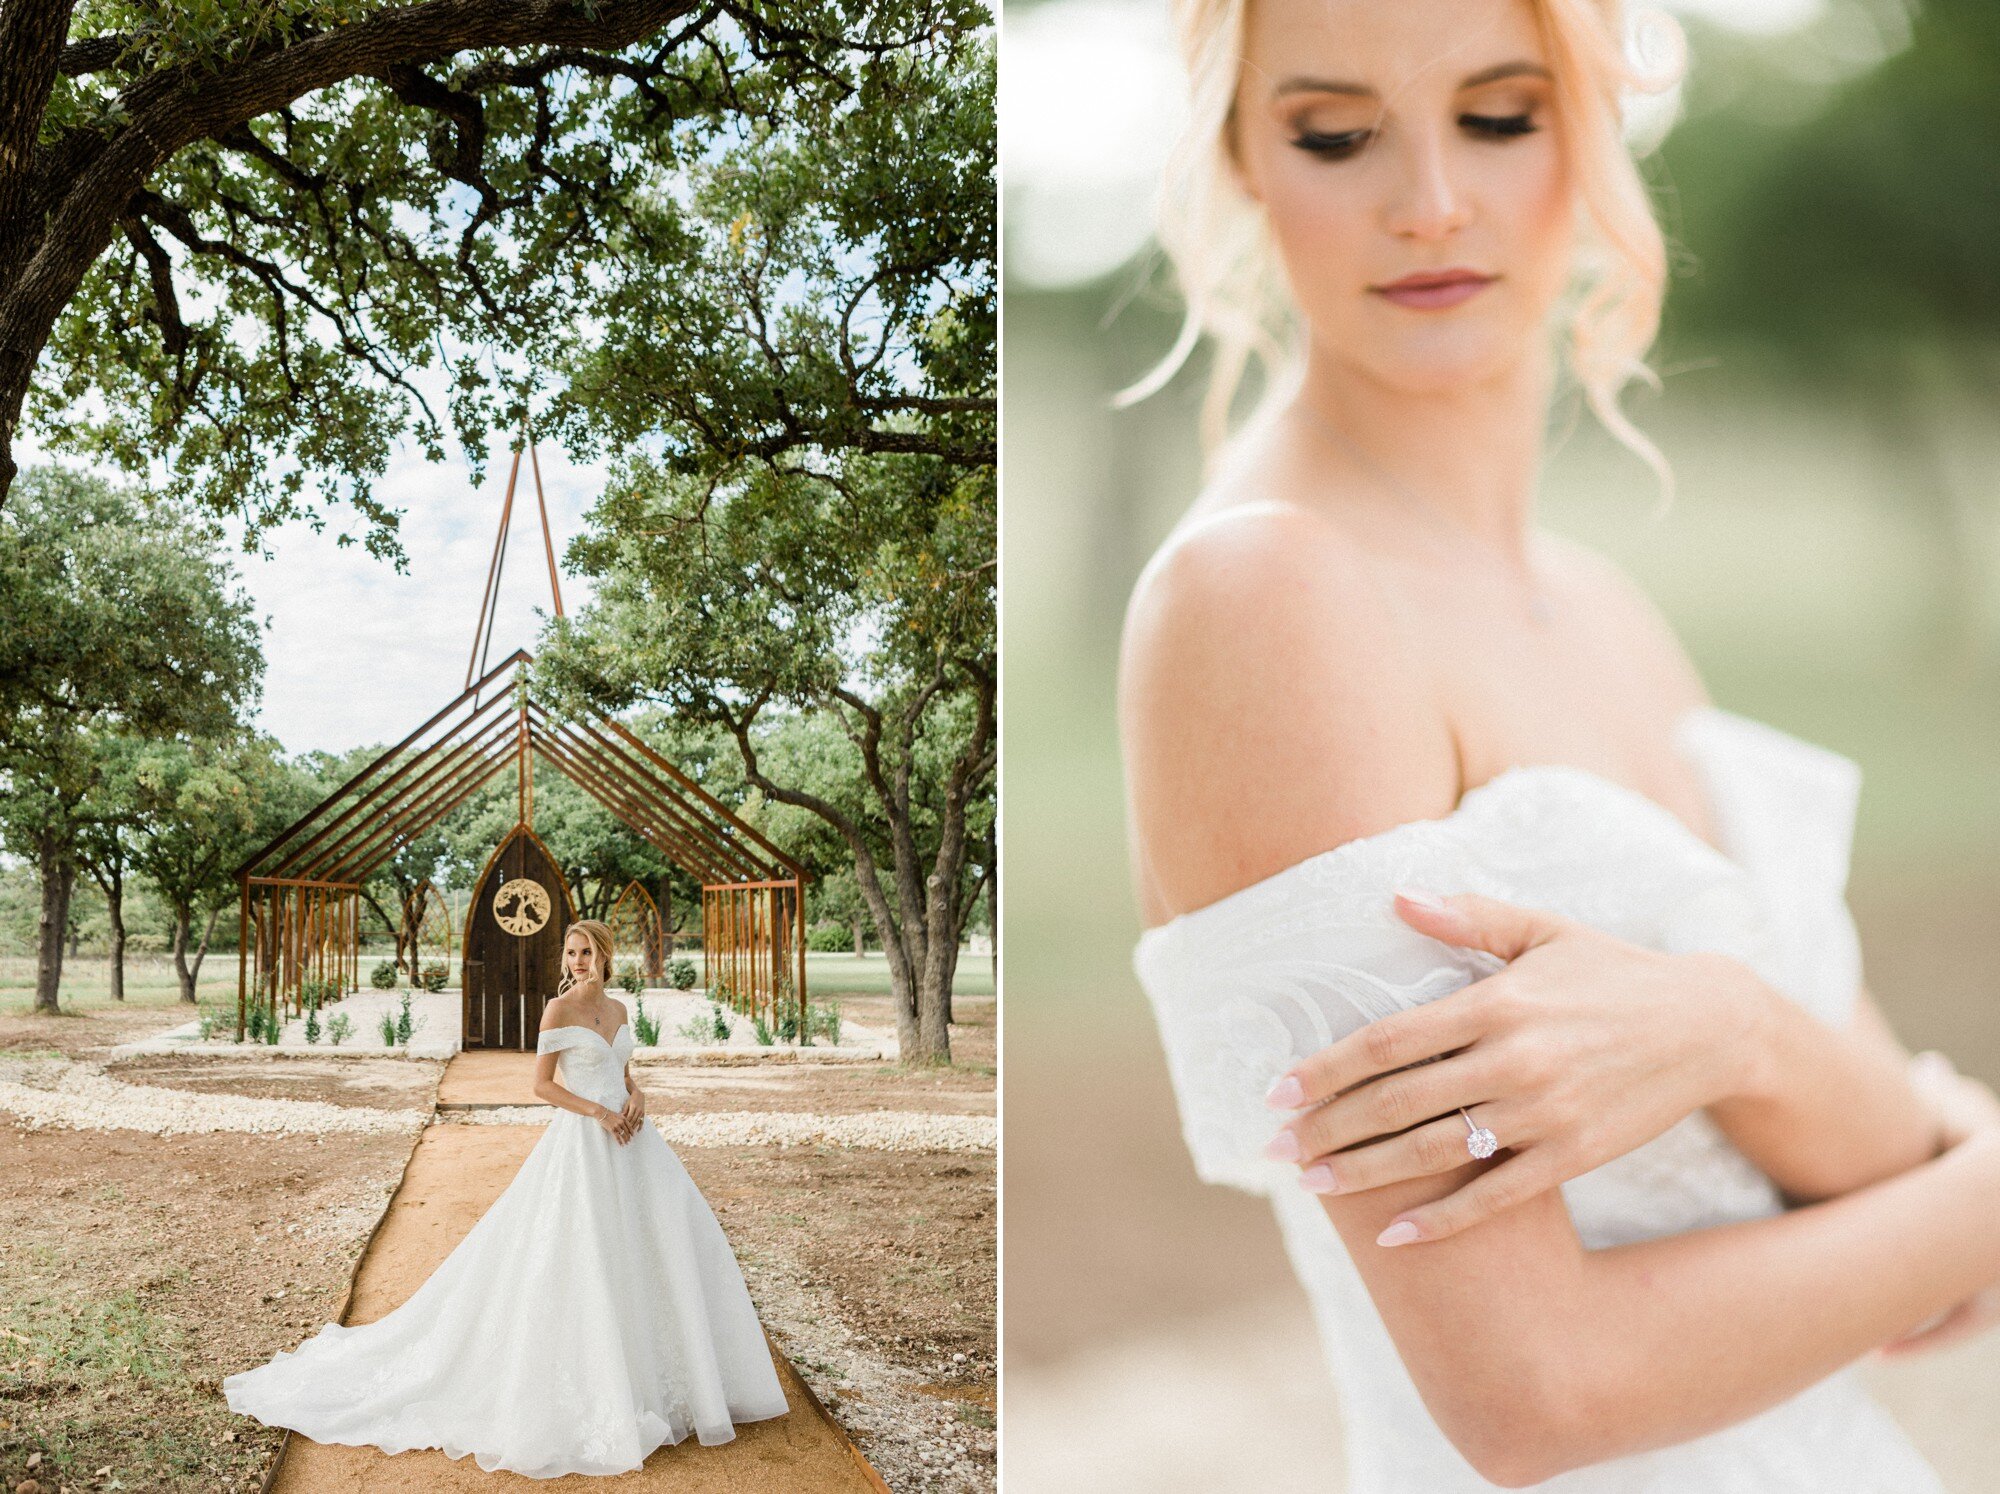  styled wedding photo shoot at Legacy Ranch, Fredericksburg, Texas, luxury light and airy Austin wedding photographer Dreamy Elk Photography and Design, Fiancee Bridal Boutique Boerne, Sunny Hair and Makeup, Form to Feeling, open air steel framework 